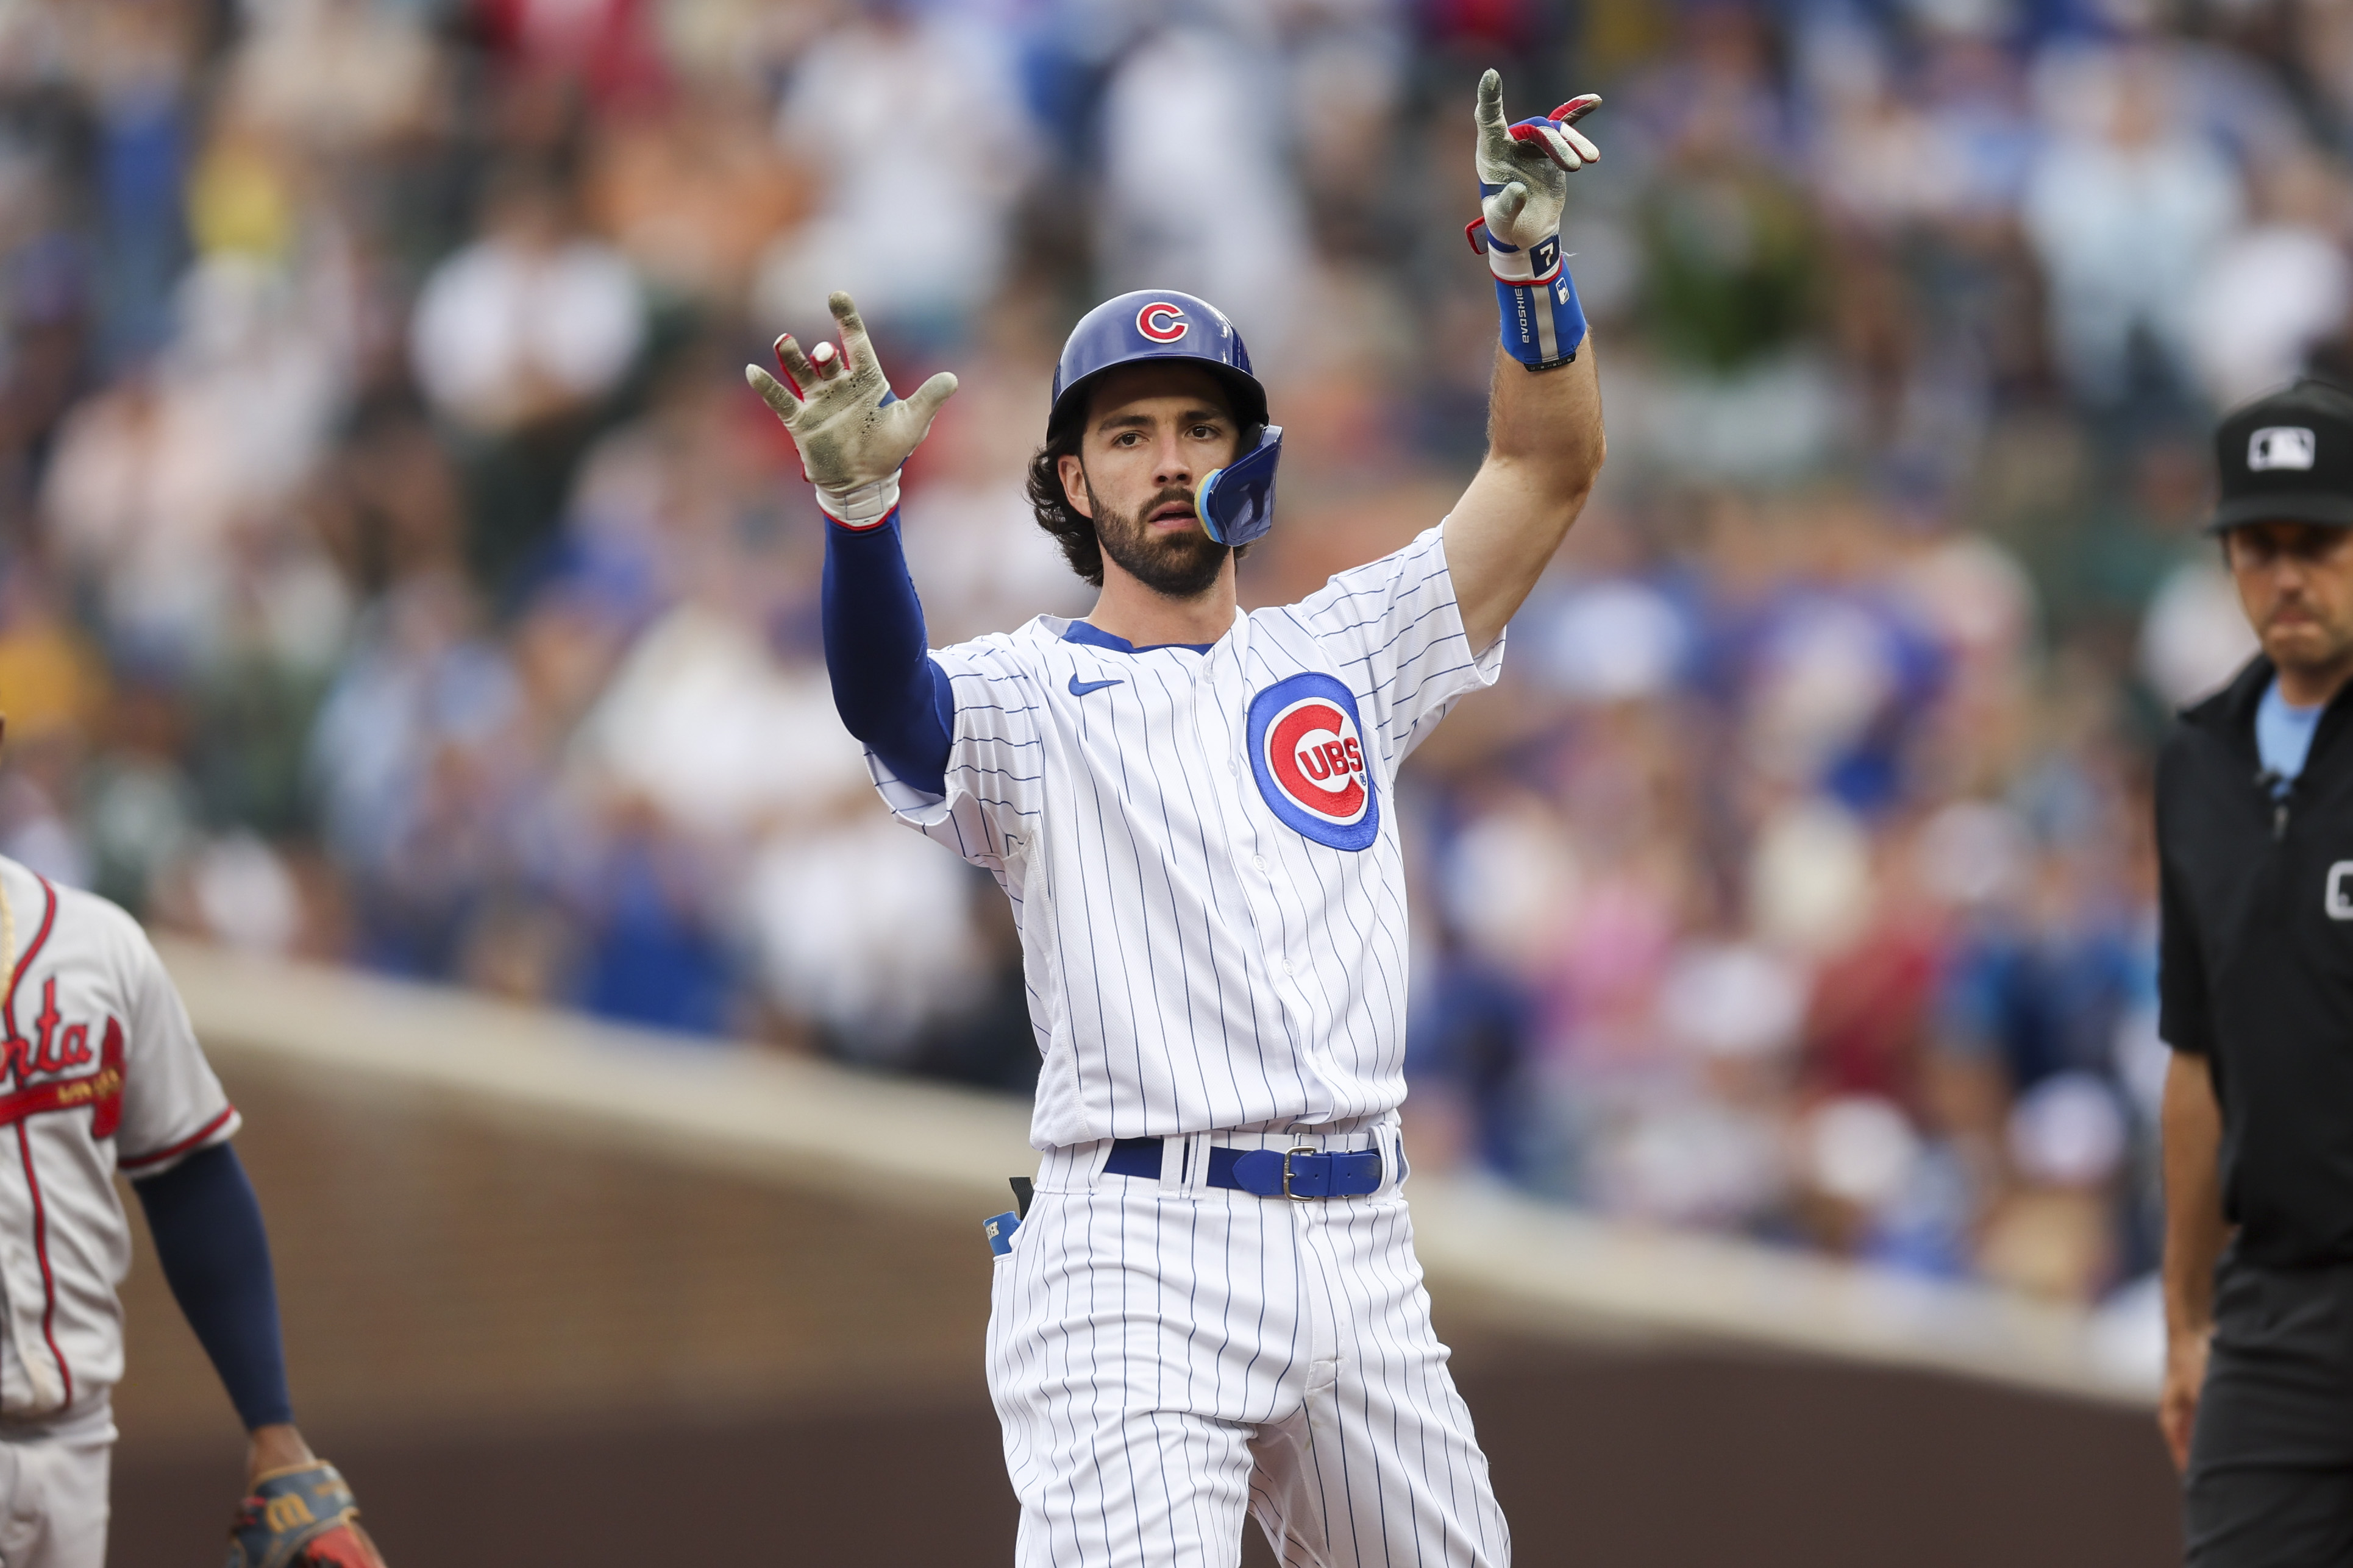 Cubs' Cody Bellinger trying to get groove back at plate - Chicago Sun-Times